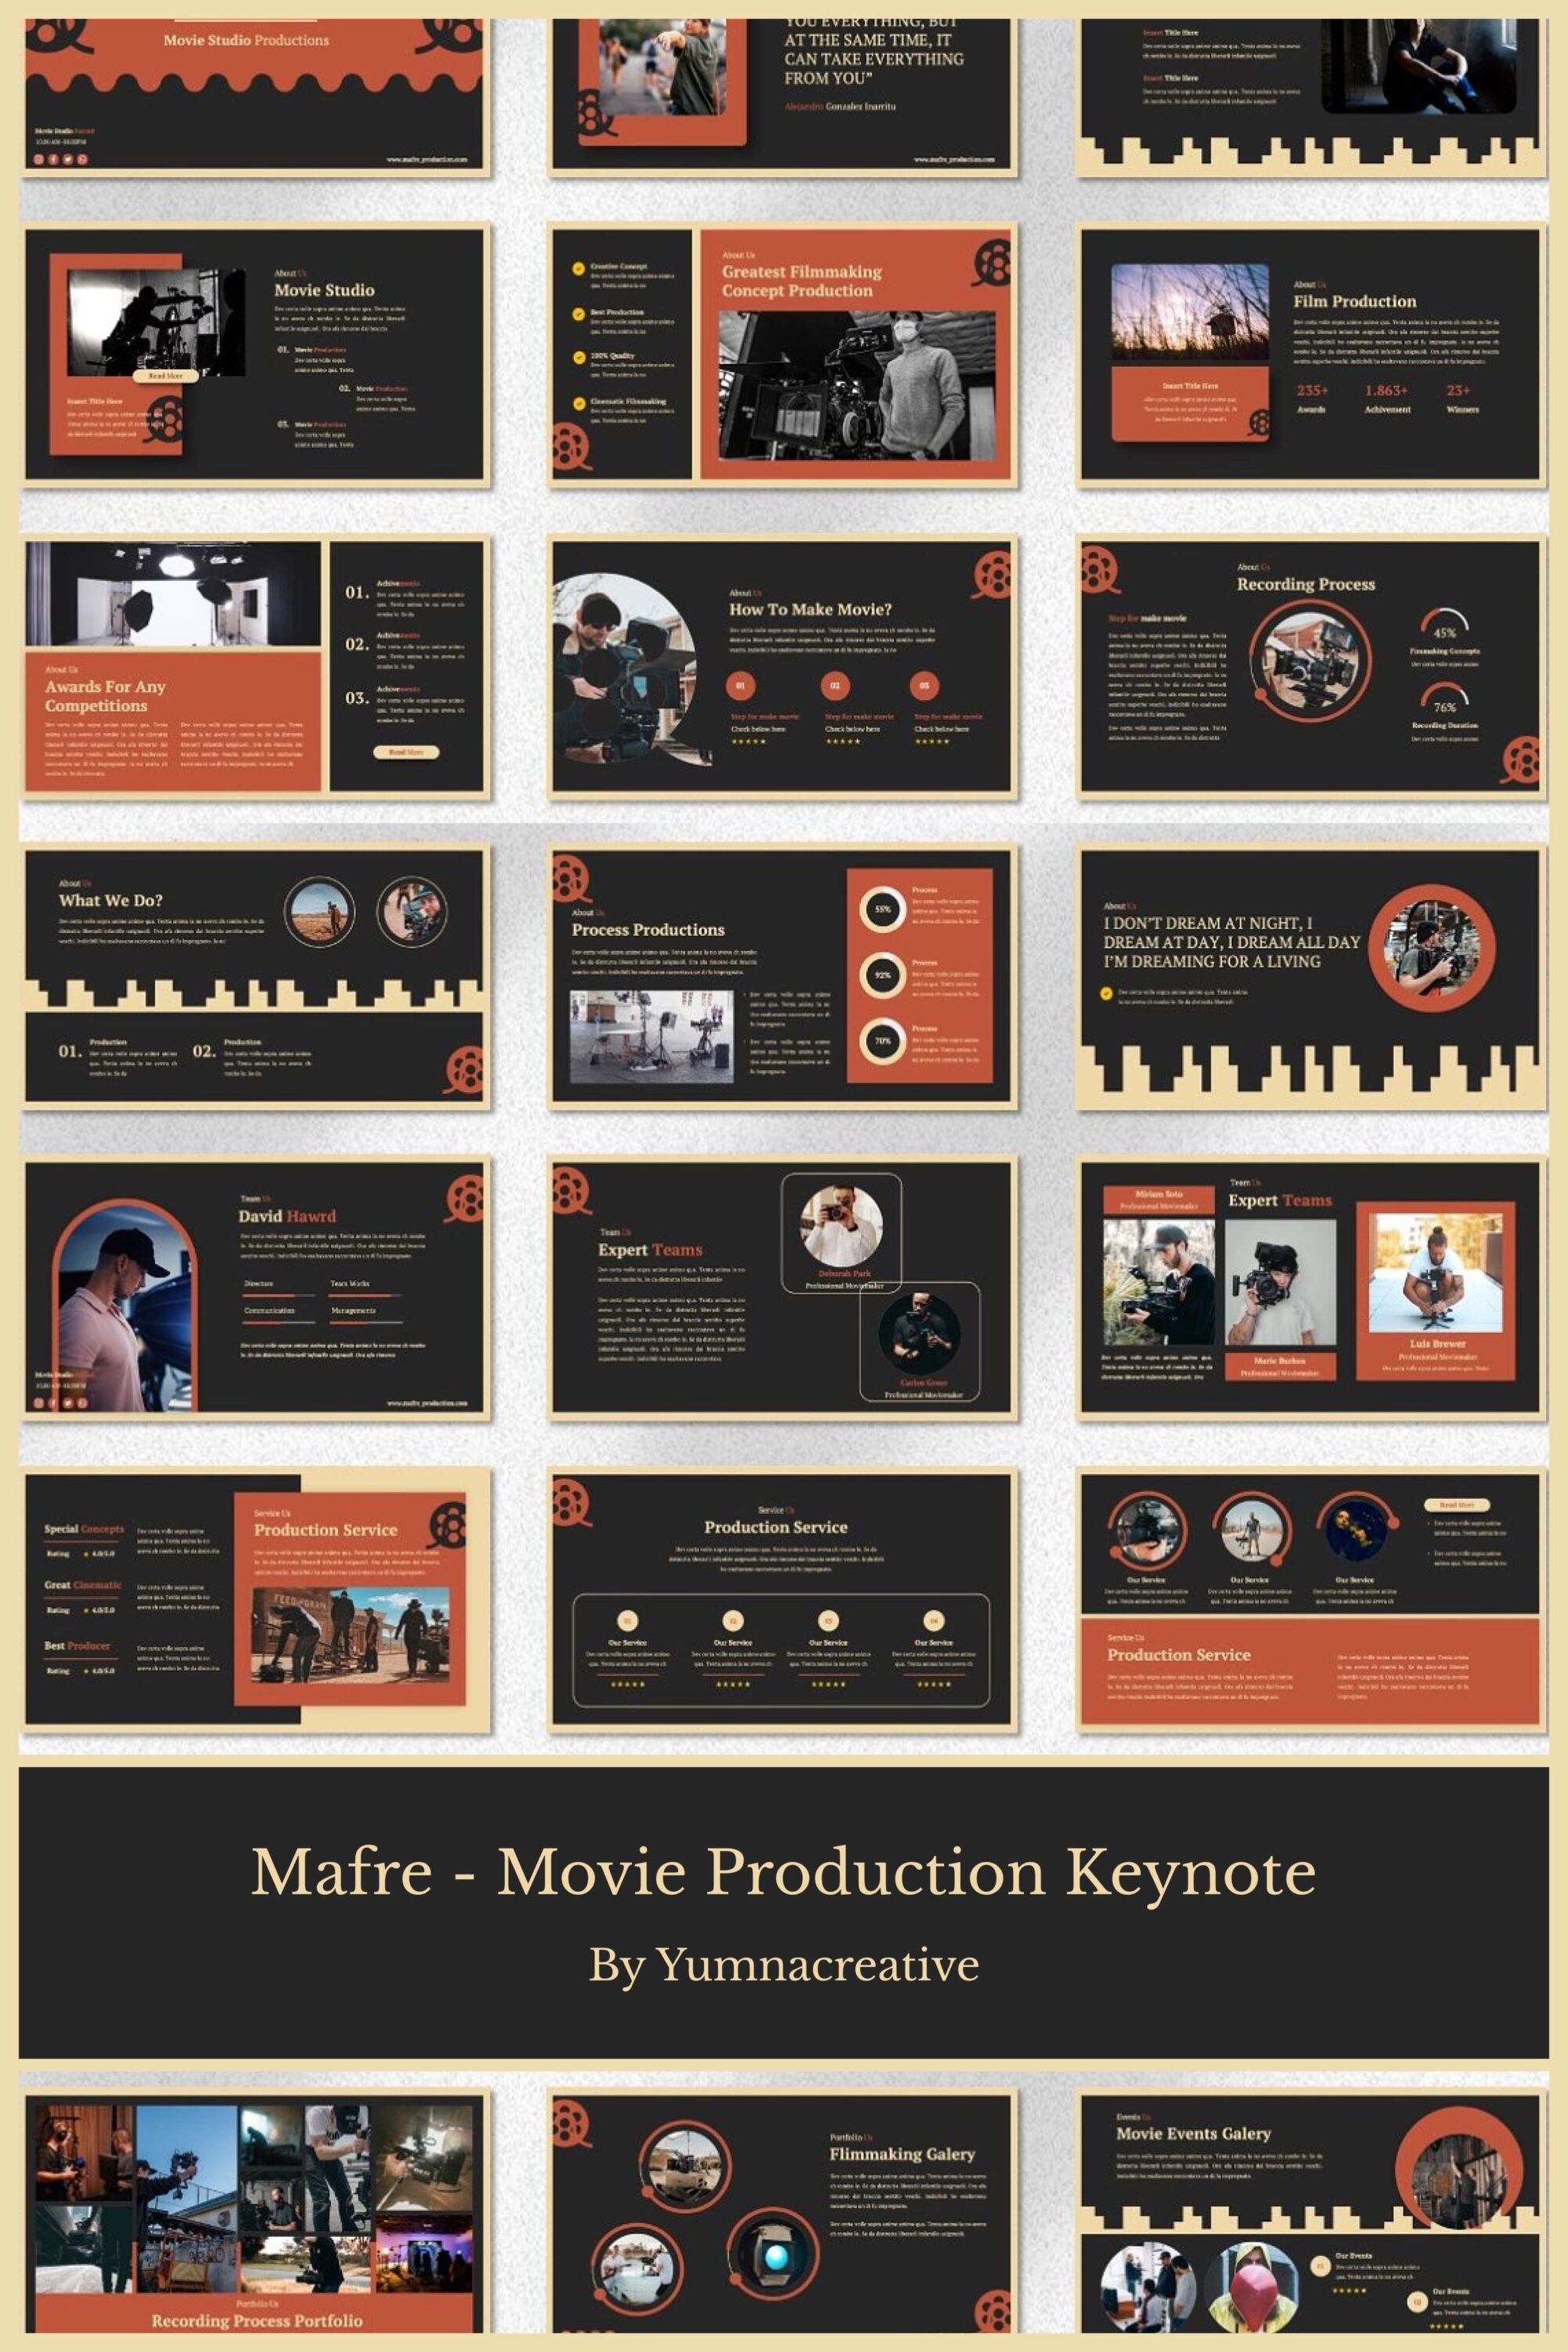 Mafre Movie Production Keynote - pinterest image preview.